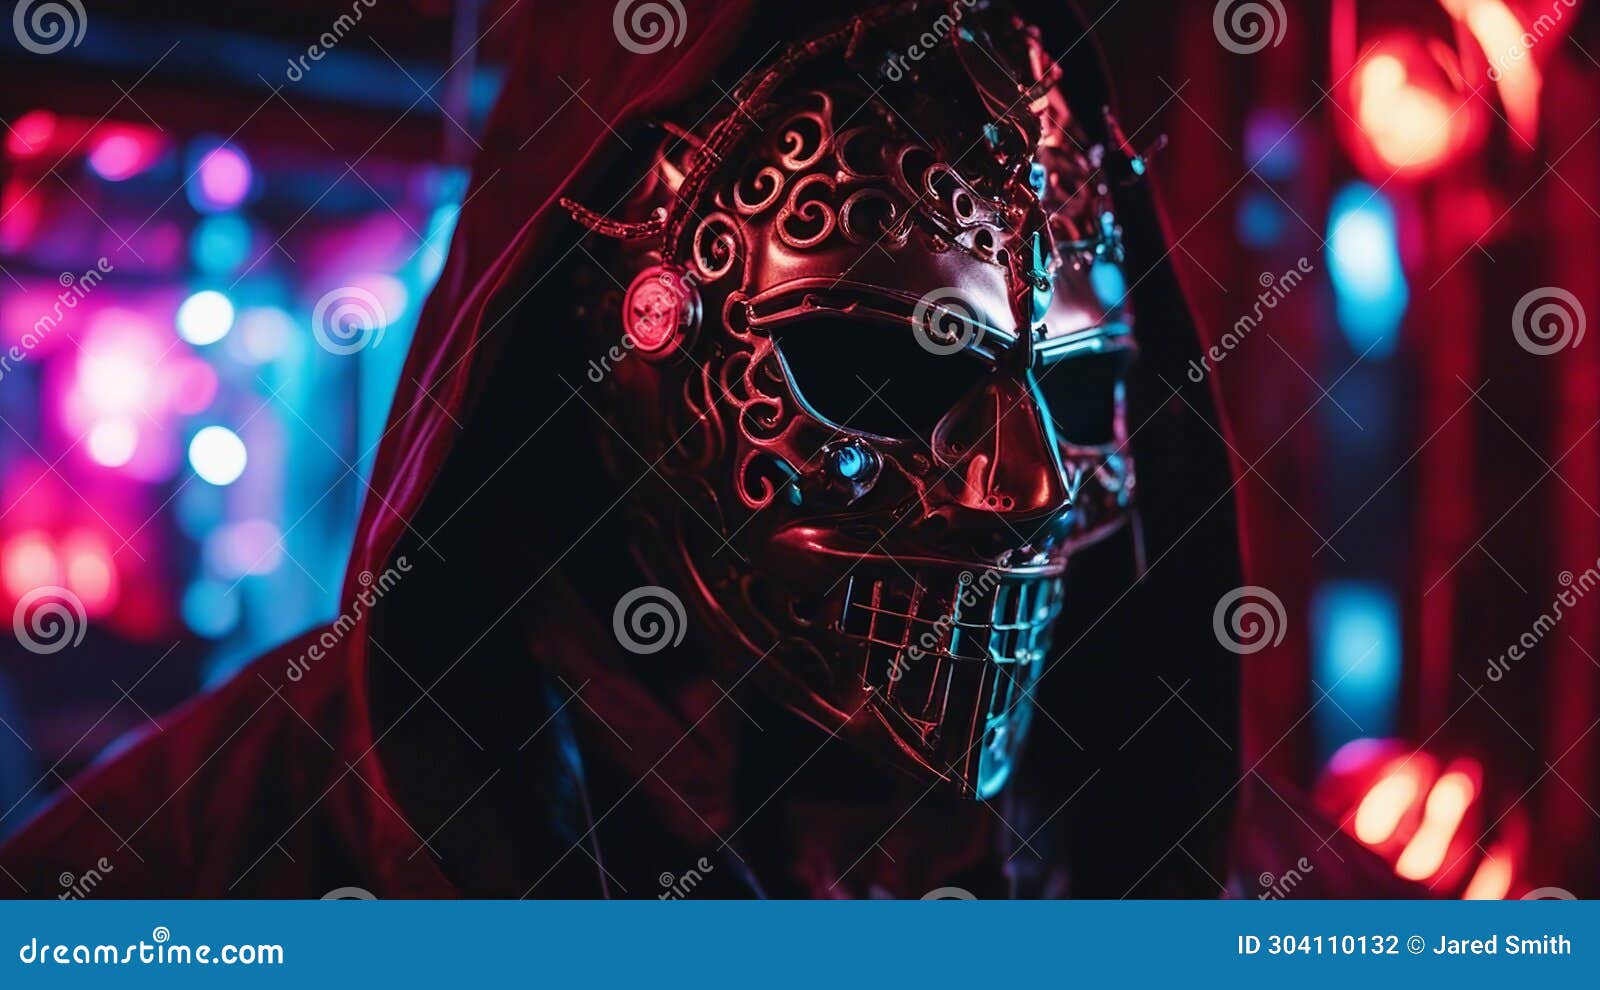 metal carnival mask at night a horror story where a killer has a mask that can terrify and manipulate his victims.